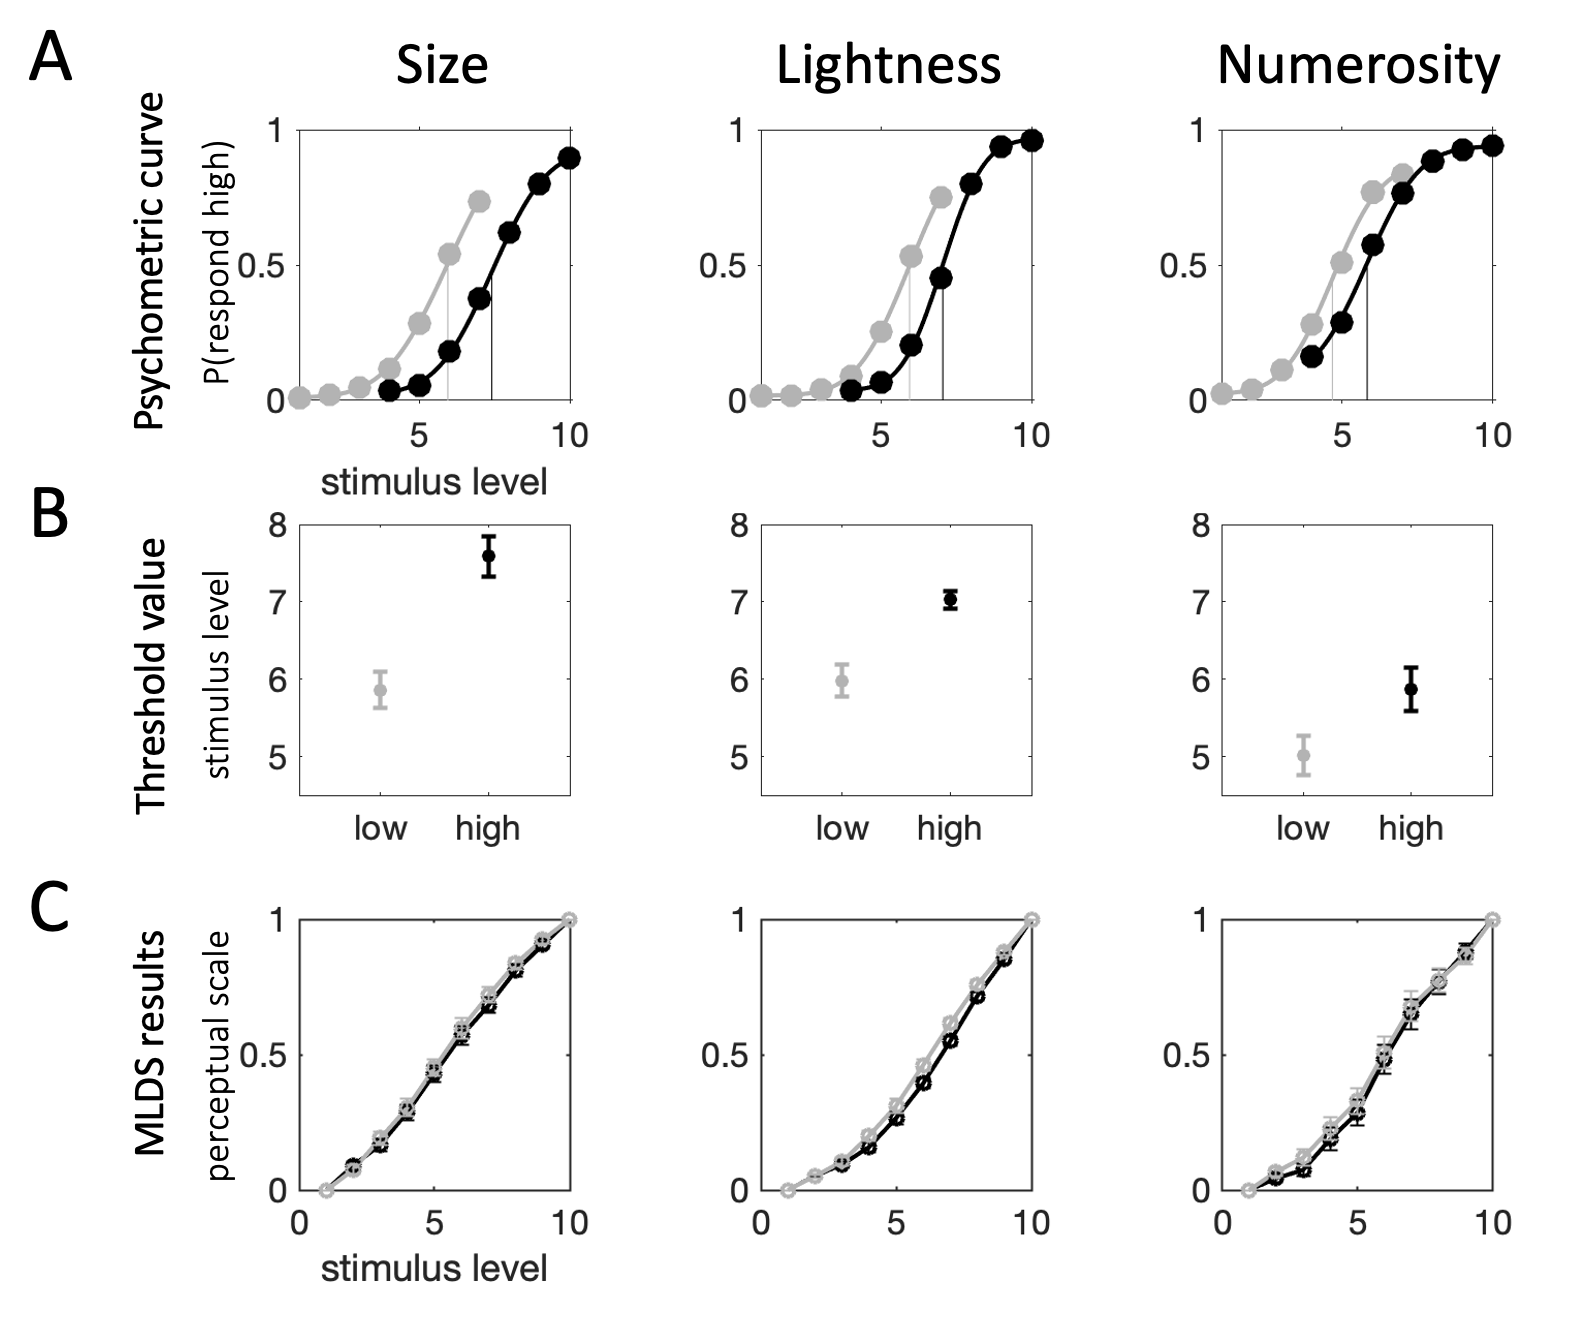 Experiment 2 results. Columns show results for each of the three different parts (left: size, middle: lightness and right: numerosity). $\textbf{A:}$ Psychometric functions based on aggregate data collapsed across participants. Points show raw data, curves -- cumulative Gaussian functions fit to data. Vertical lines show threshold value estimates for each condition. Shading indexes context condition (grey: low, black: high). Note that these average curves are for illustration purposes only, they are not necessarily representative of any one participant in the experiment. $\textbf{B:}$ Average threshold values (across all participants) for the two conditions (grey: low, black: high). Error bars depict SEM. $\textbf{C:}$ Perceptual scales for the two conditions (grey: low, black: high). Dots depict average scale value across participants, error bars depict SEM.